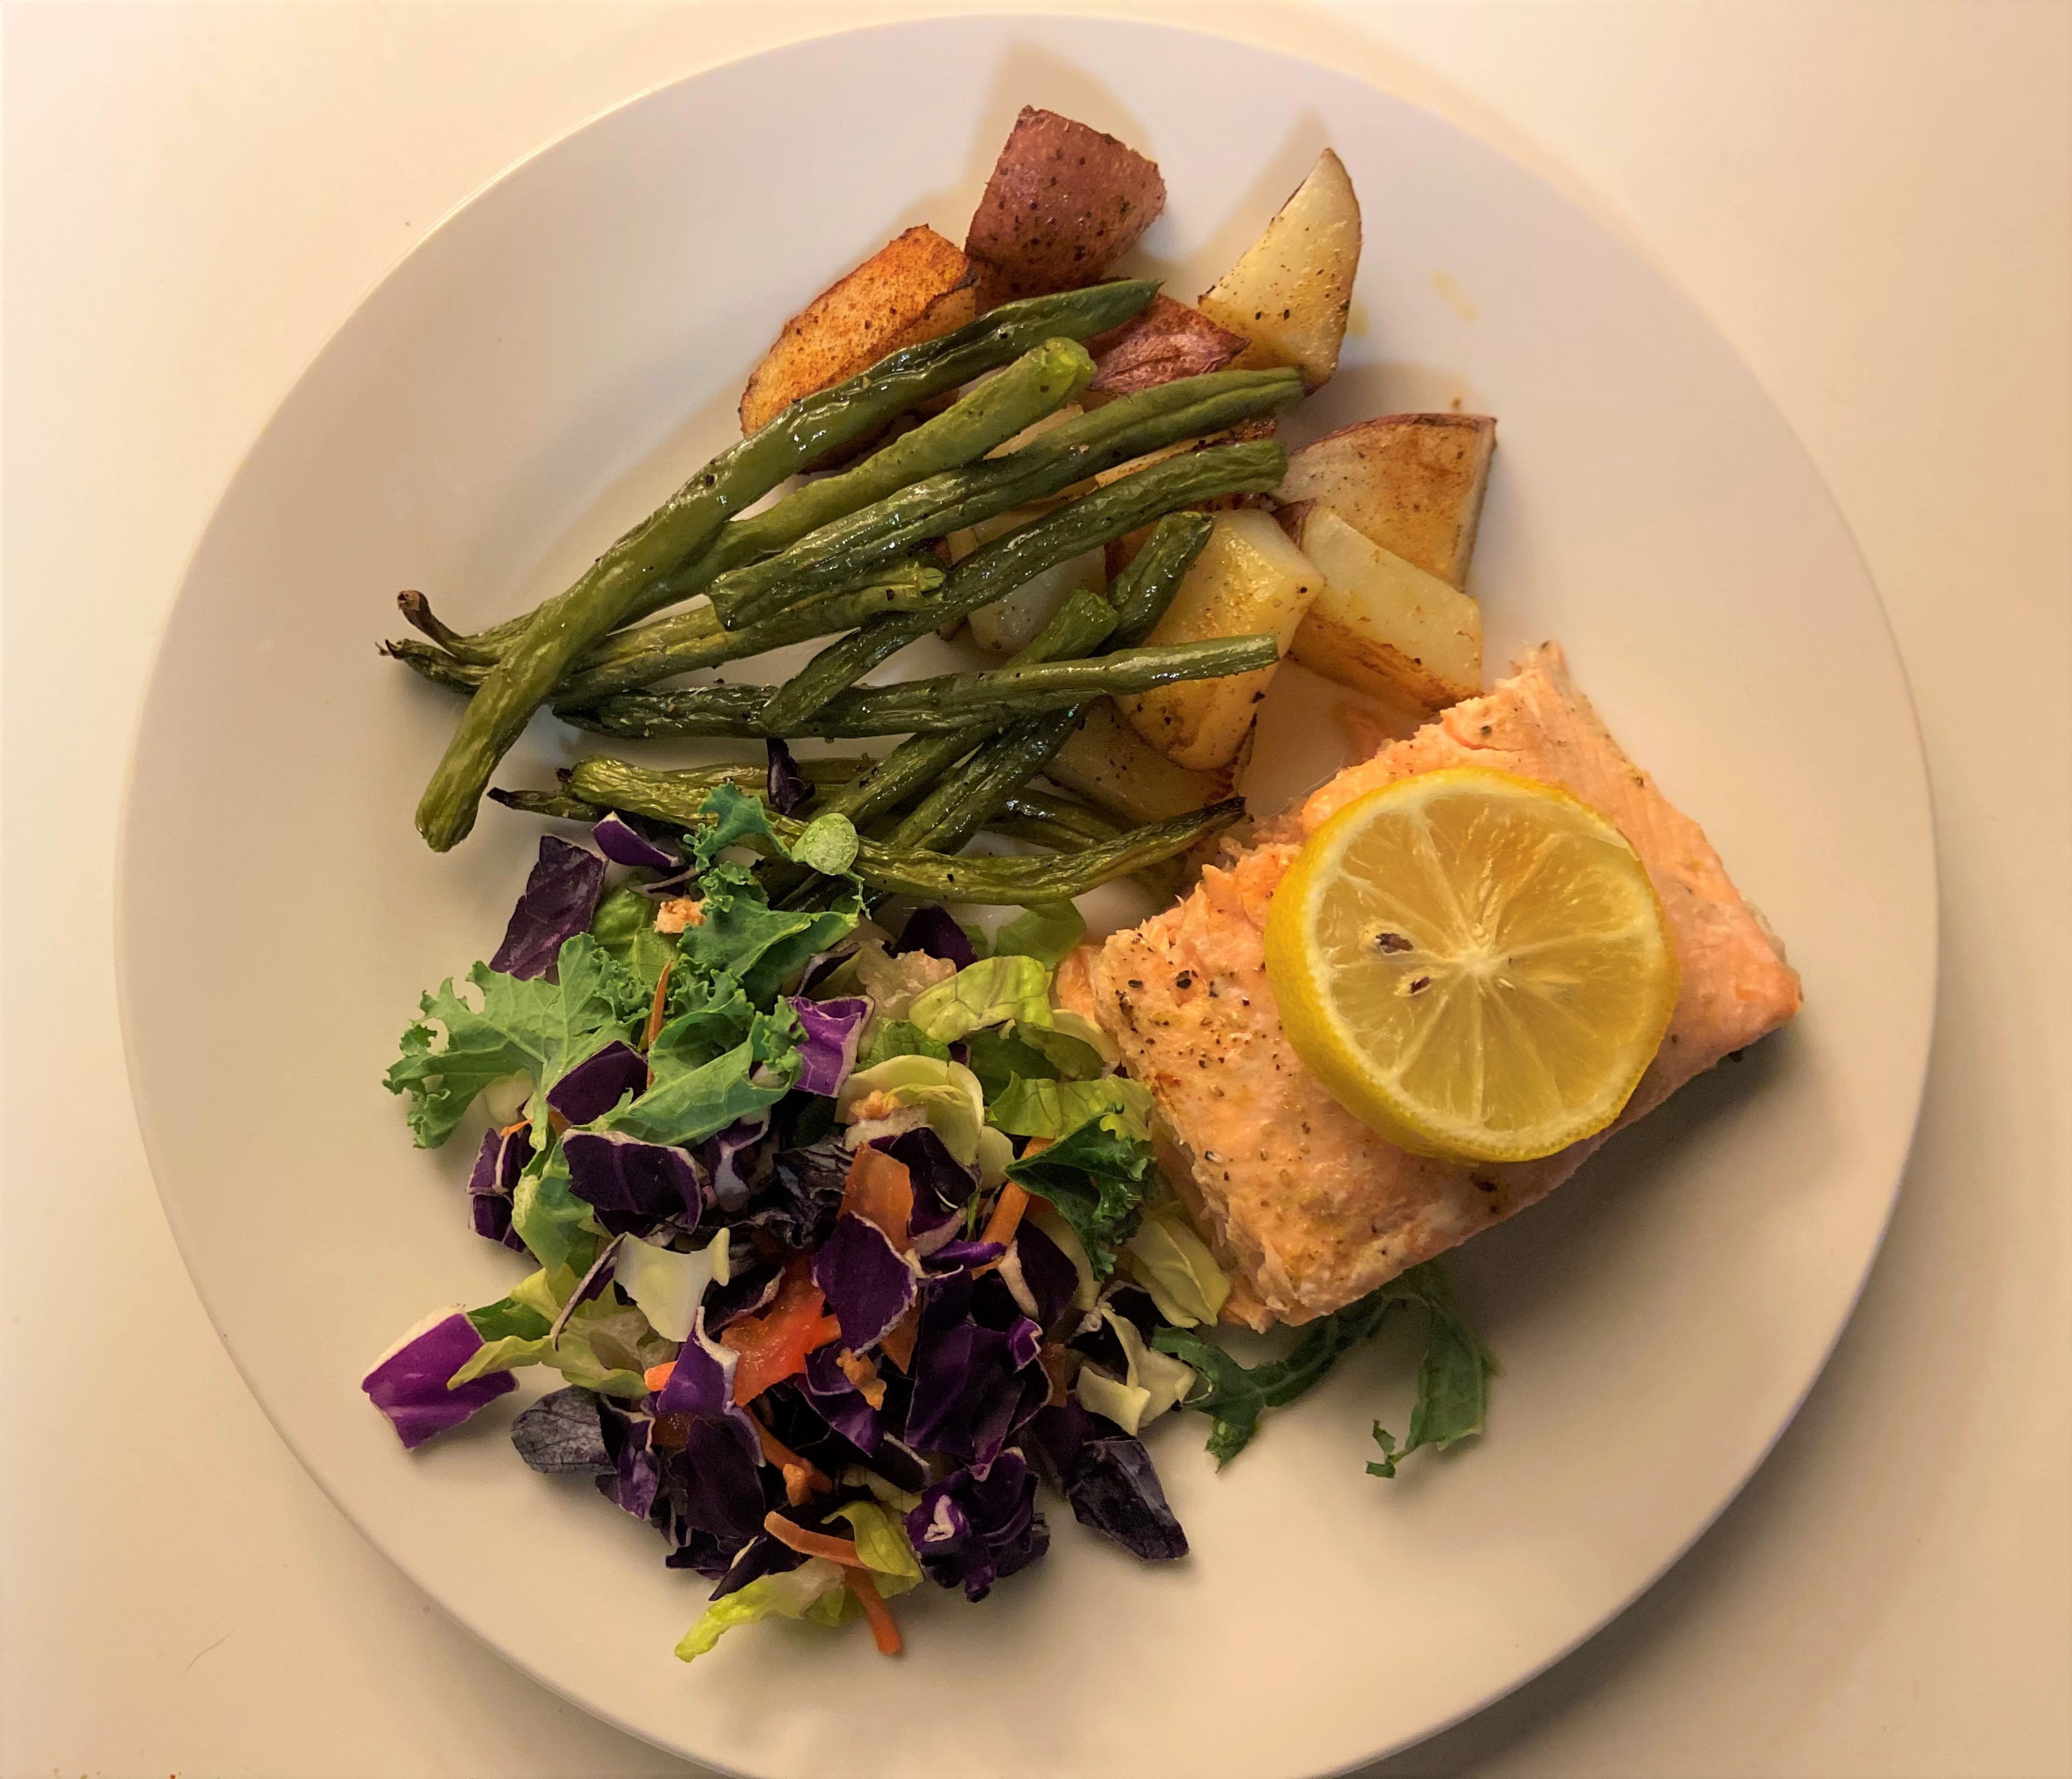 Lemon roasted salmon with green beans and roasted potatoes.